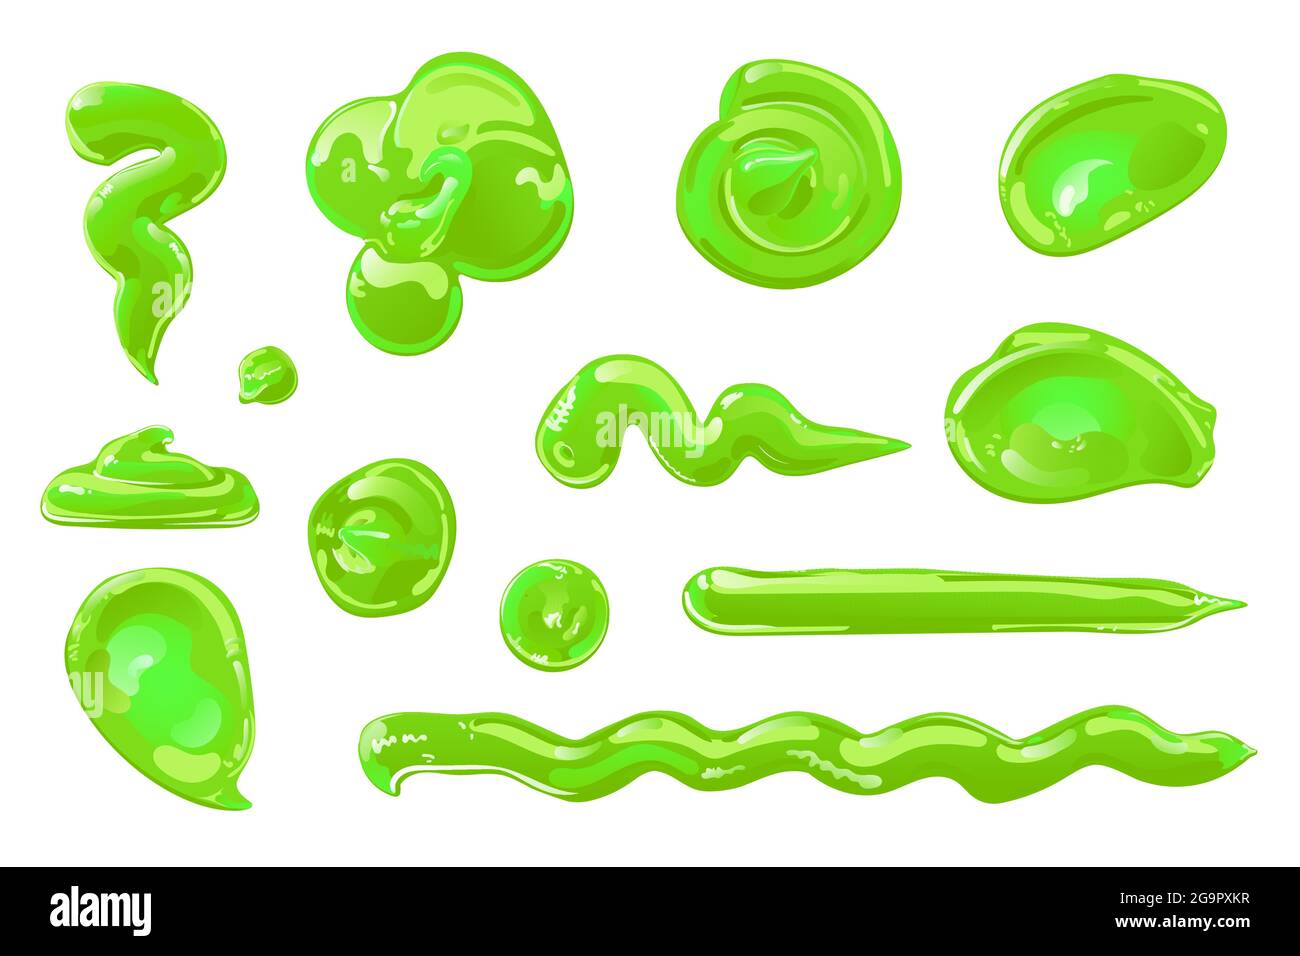 Green slime in flat cartoon style set. Toxic jelly splashes, drops or stains. Vector design for Halloween. Stock Vector